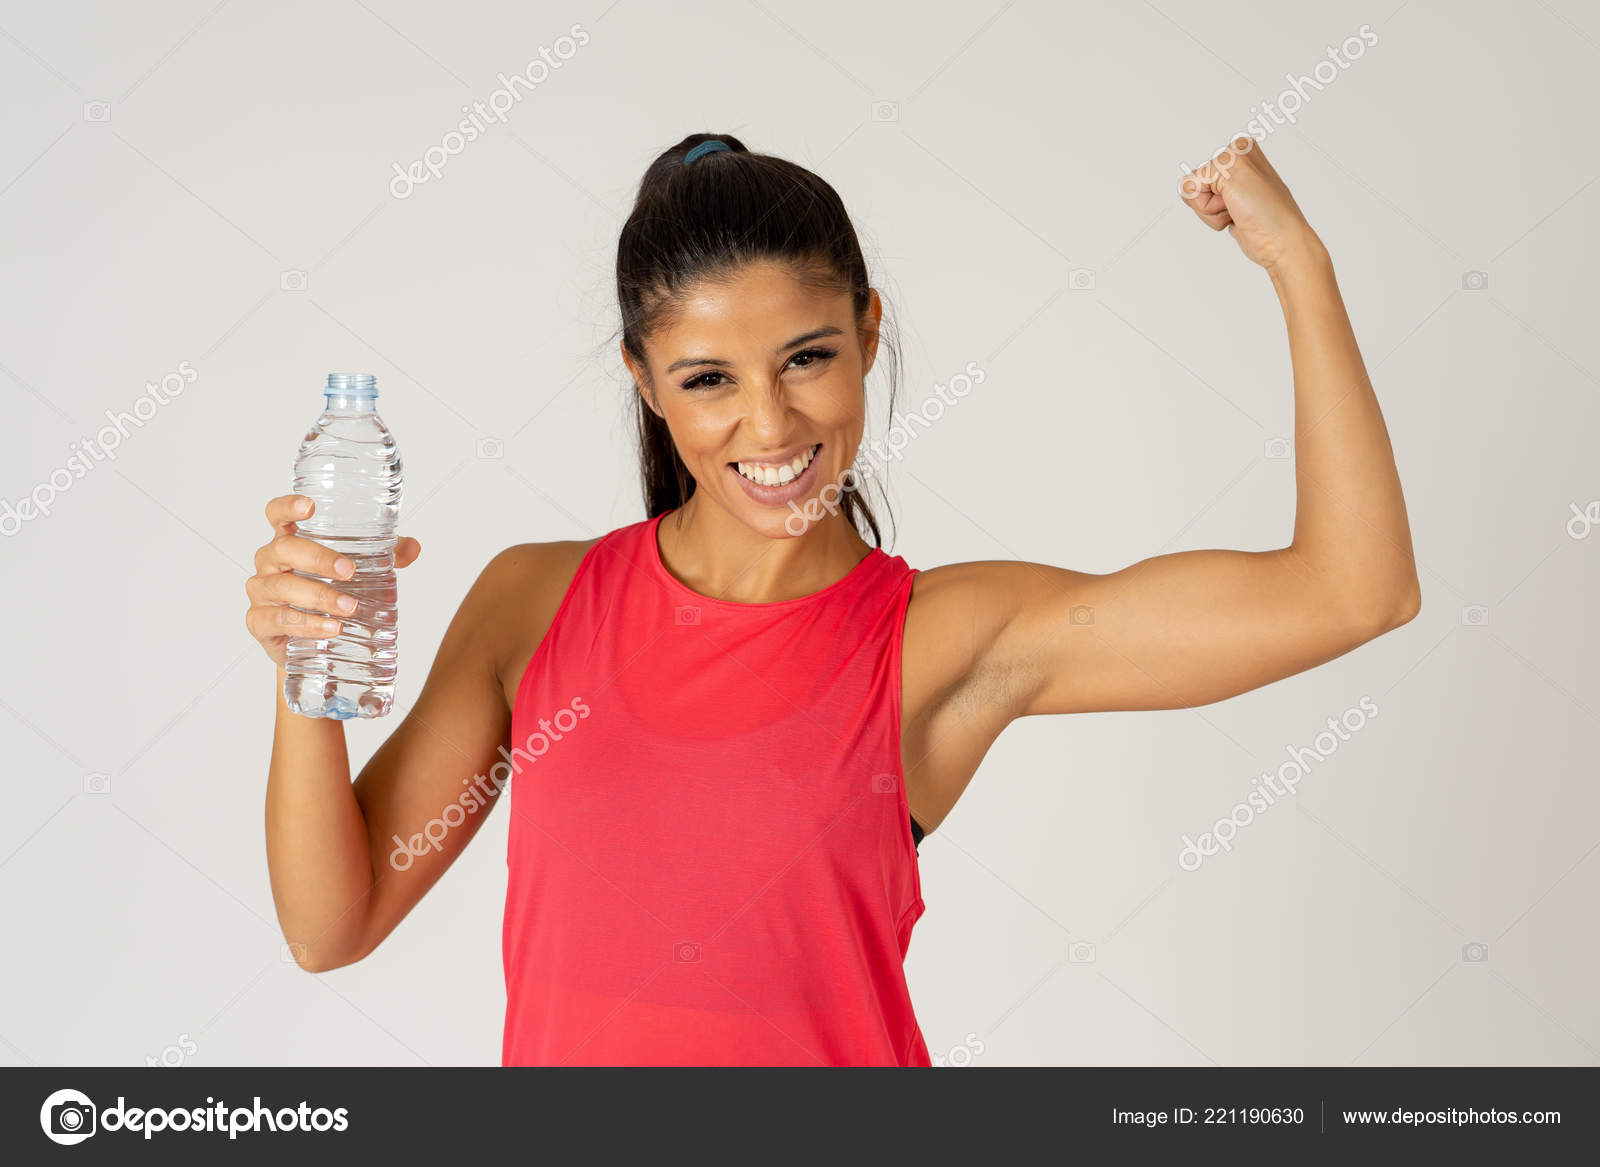 Fitness Young Woman Athlete Water Bottle Exercise Hydration